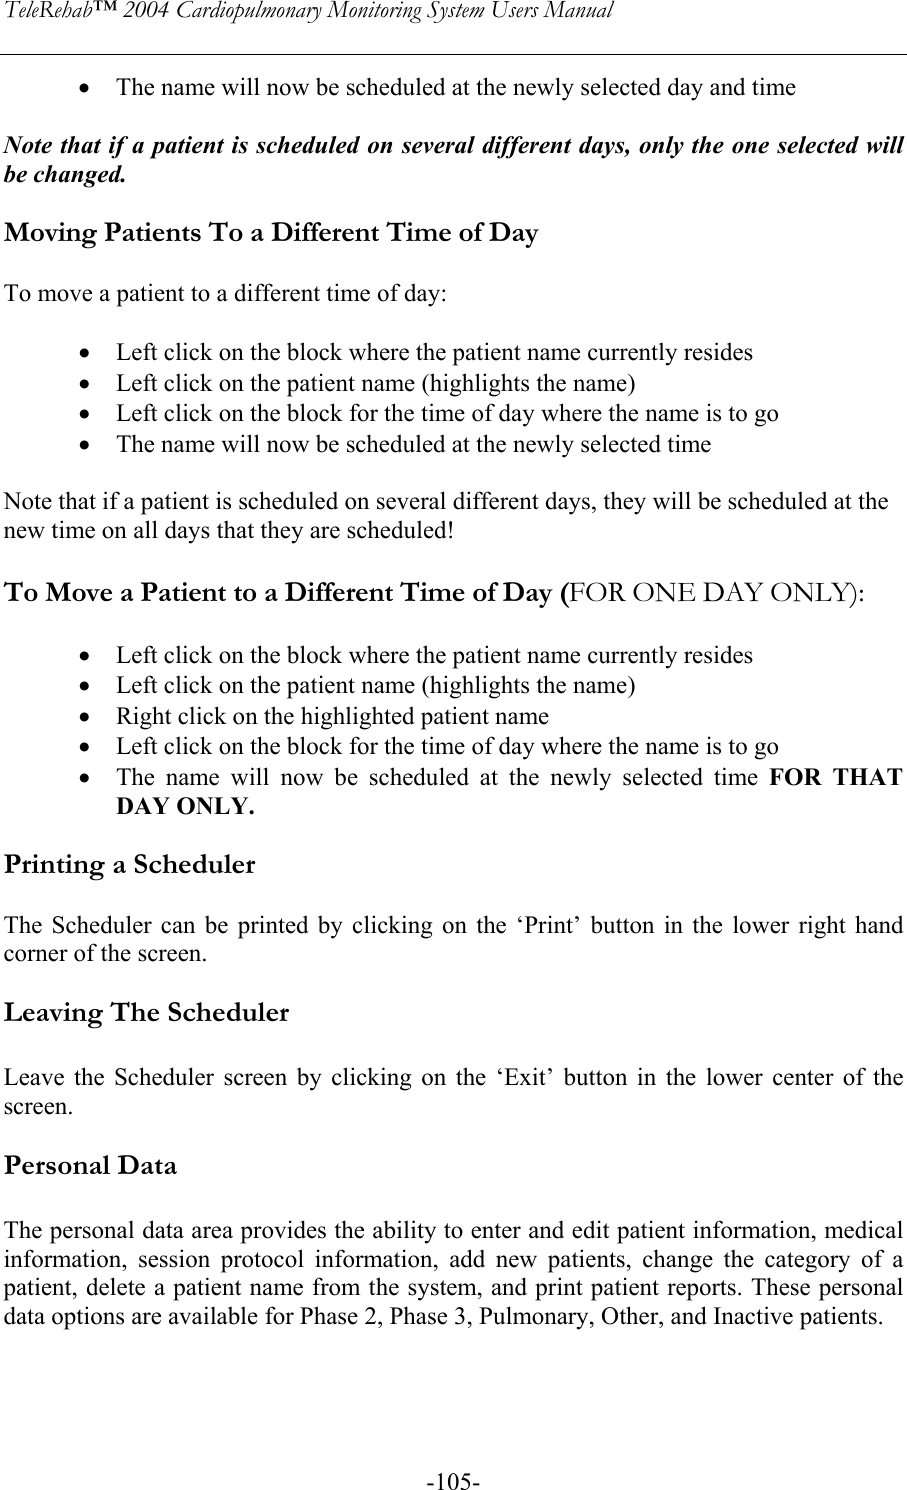 TeleRehab™ 2004 Cardiopulmonary Monitoring System Users Manual    -105-• The name will now be scheduled at the newly selected day and time  Note that if a patient is scheduled on several different days, only the one selected will be changed.  Moving Patients To a Different Time of Day  To move a patient to a different time of day:  • Left click on the block where the patient name currently resides • Left click on the patient name (highlights the name) • Left click on the block for the time of day where the name is to go • The name will now be scheduled at the newly selected time  Note that if a patient is scheduled on several different days, they will be scheduled at the new time on all days that they are scheduled!  To Move a Patient to a Different Time of Day (FOR ONE DAY ONLY):  • Left click on the block where the patient name currently resides • Left click on the patient name (highlights the name) • Right click on the highlighted patient name • Left click on the block for the time of day where the name is to go • The name will now be scheduled at the newly selected time FOR THAT DAY ONLY.  Printing a Scheduler   The Scheduler can be printed by clicking on the ‘Print’ button in the lower right hand corner of the screen.  Leaving The Scheduler  Leave the Scheduler screen by clicking on the ‘Exit’ button in the lower center of the screen.  Personal Data  The personal data area provides the ability to enter and edit patient information, medical information, session protocol information, add new patients, change the category of a patient, delete a patient name from the system, and print patient reports. These personal data options are available for Phase 2, Phase 3, Pulmonary, Other, and Inactive patients.   